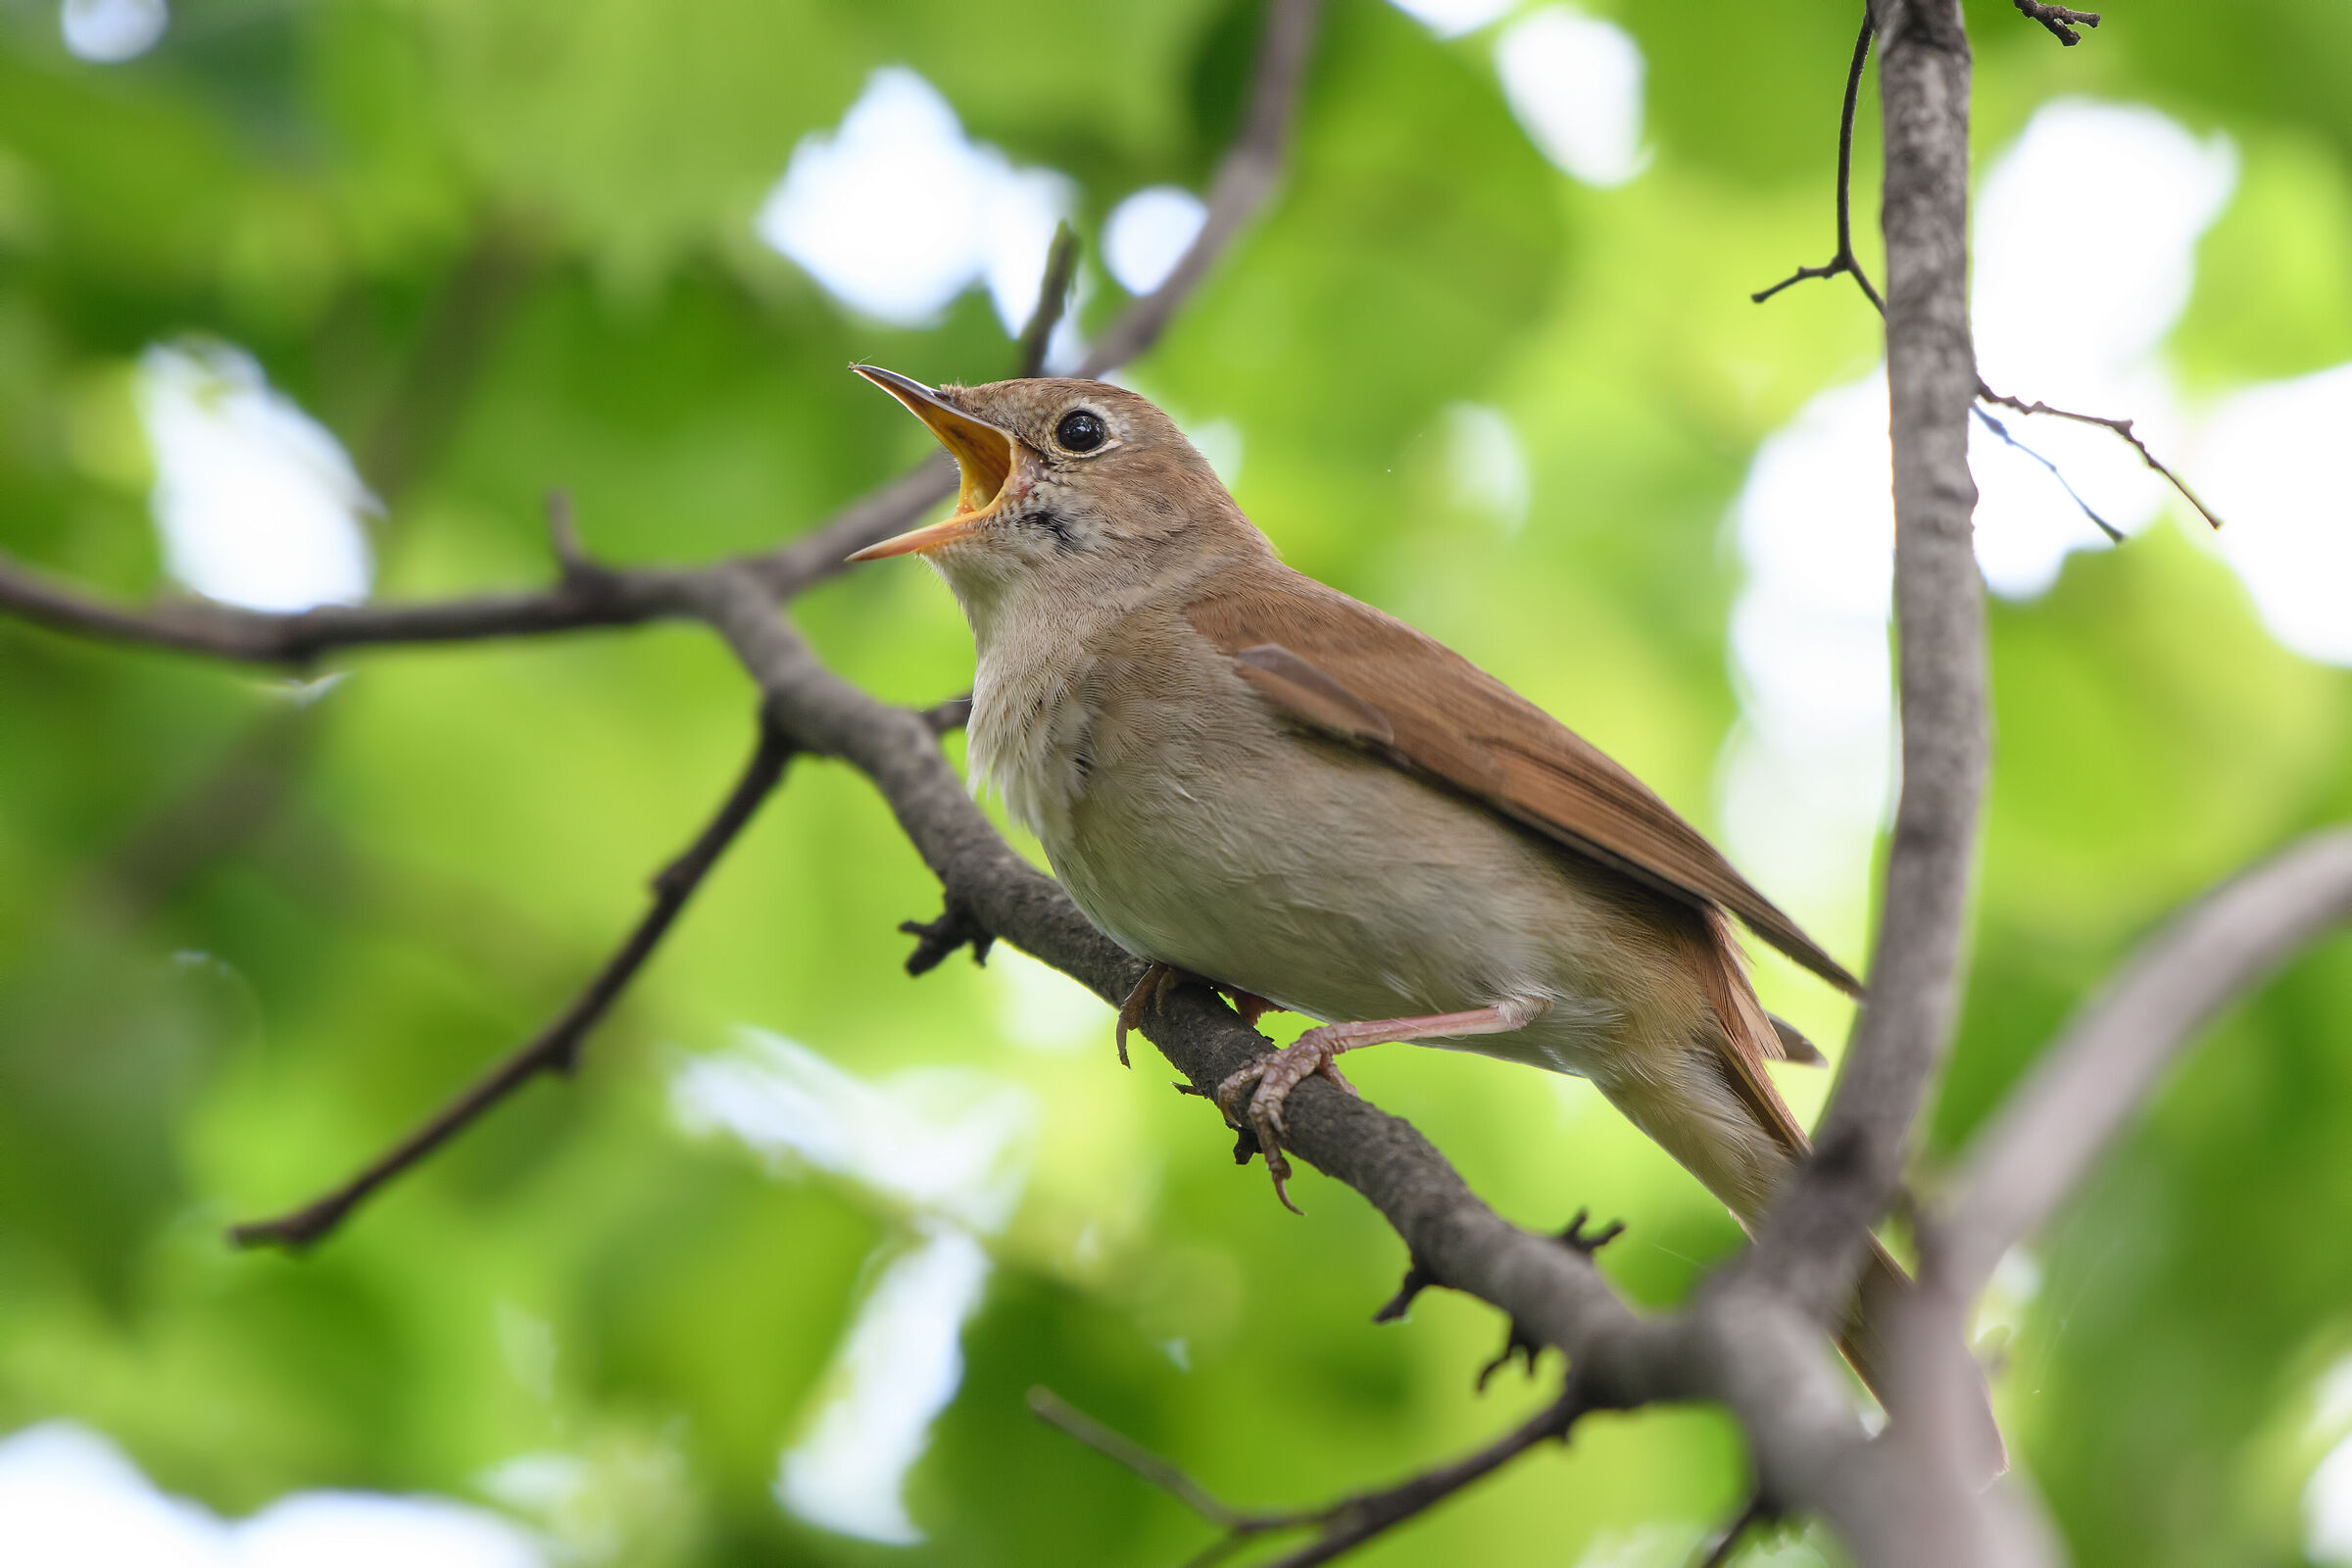 In song nightingale...